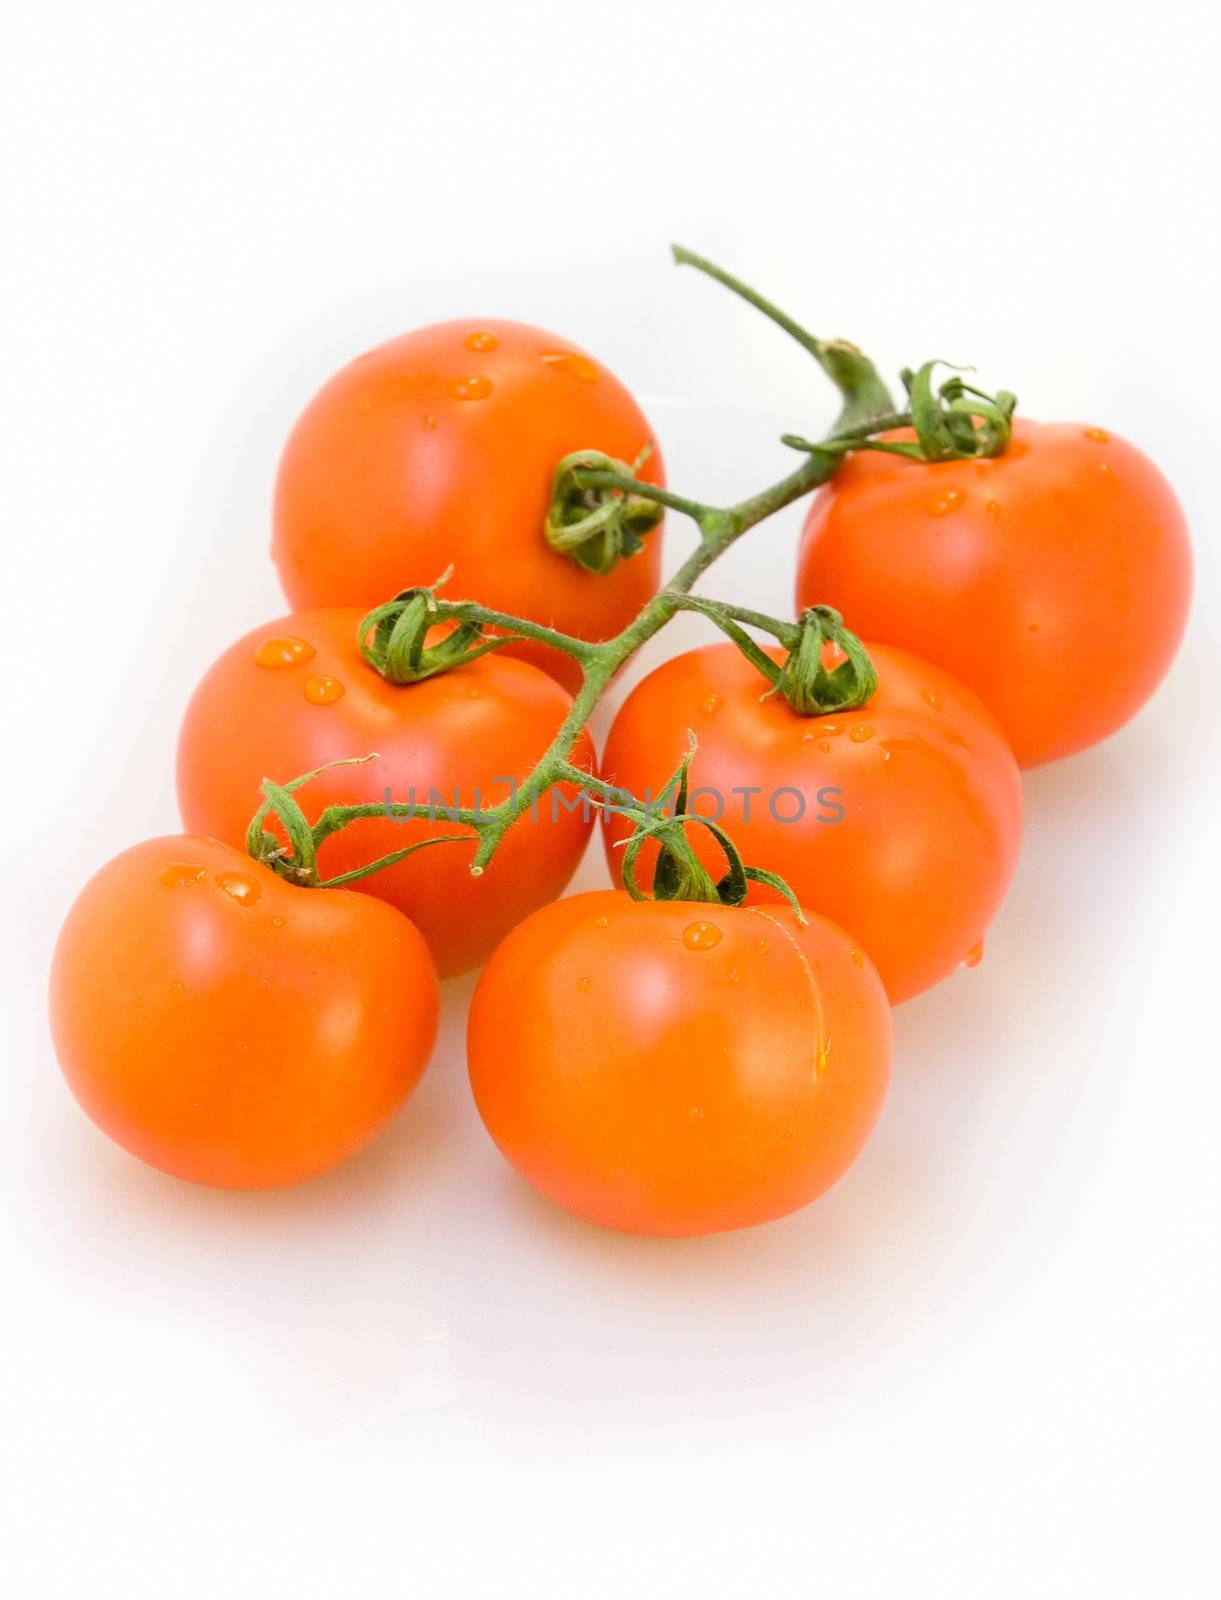 Fresh red juicy tomatoes ith water drops